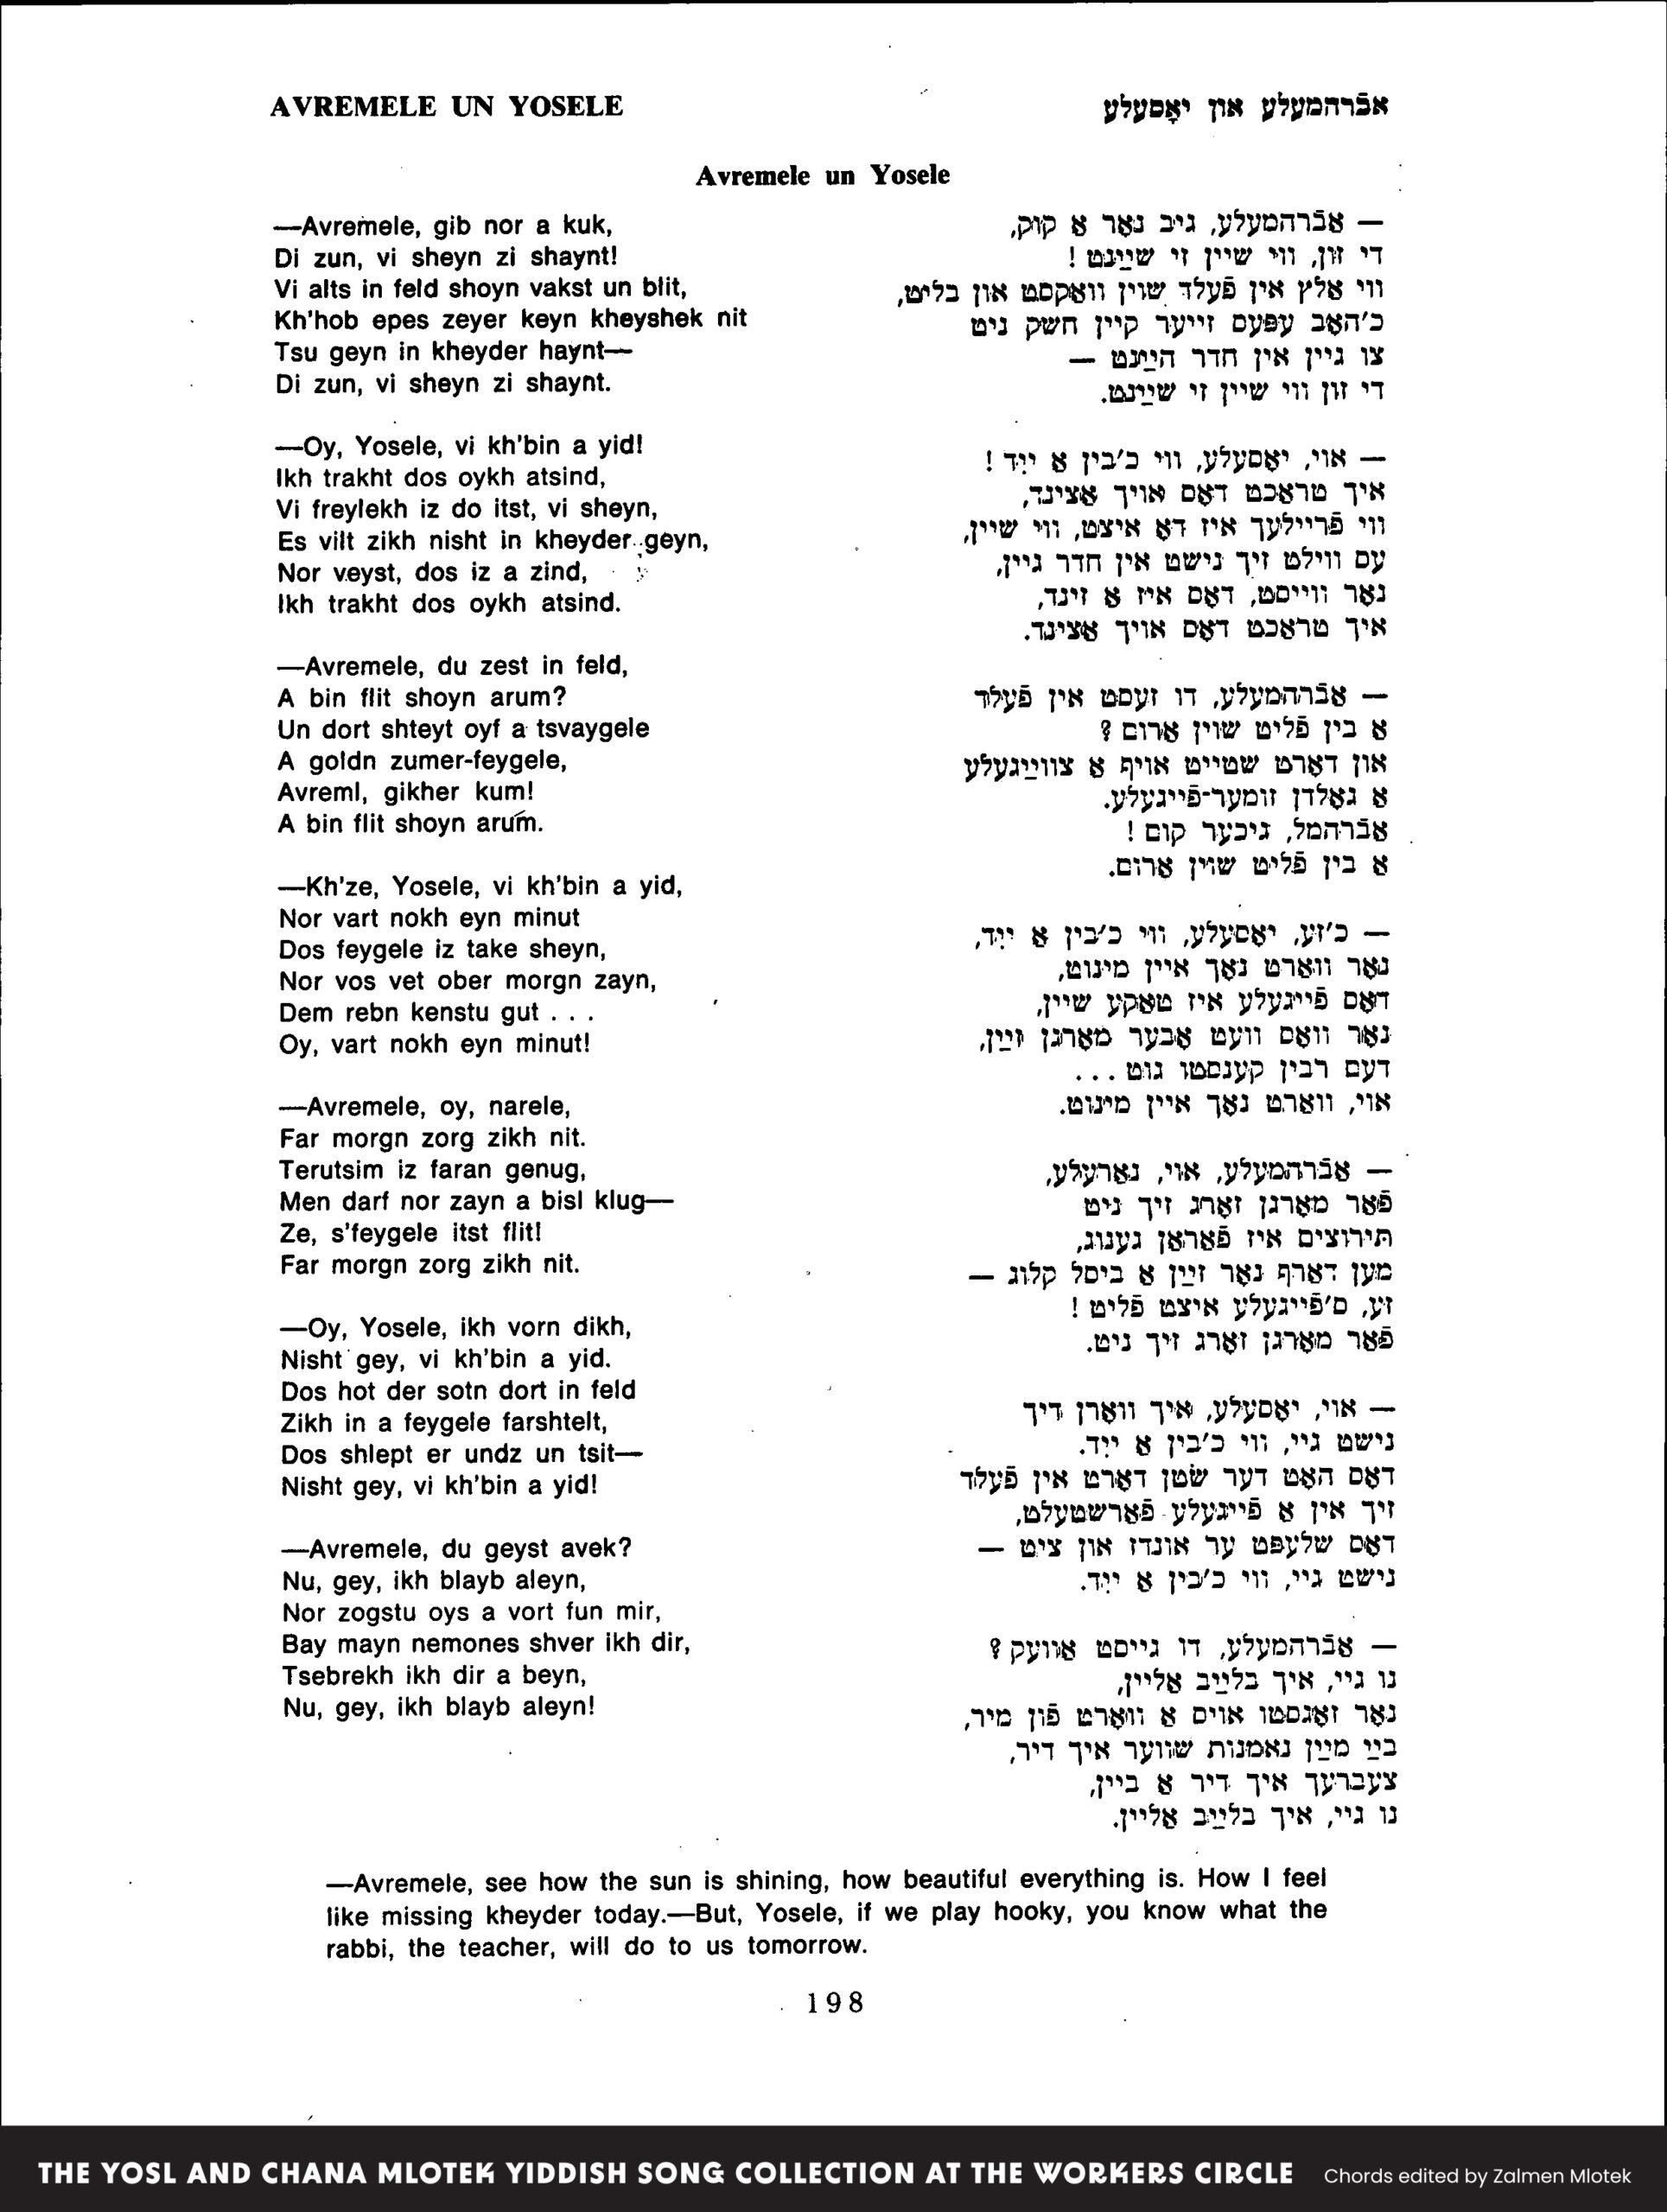 The first page of the song